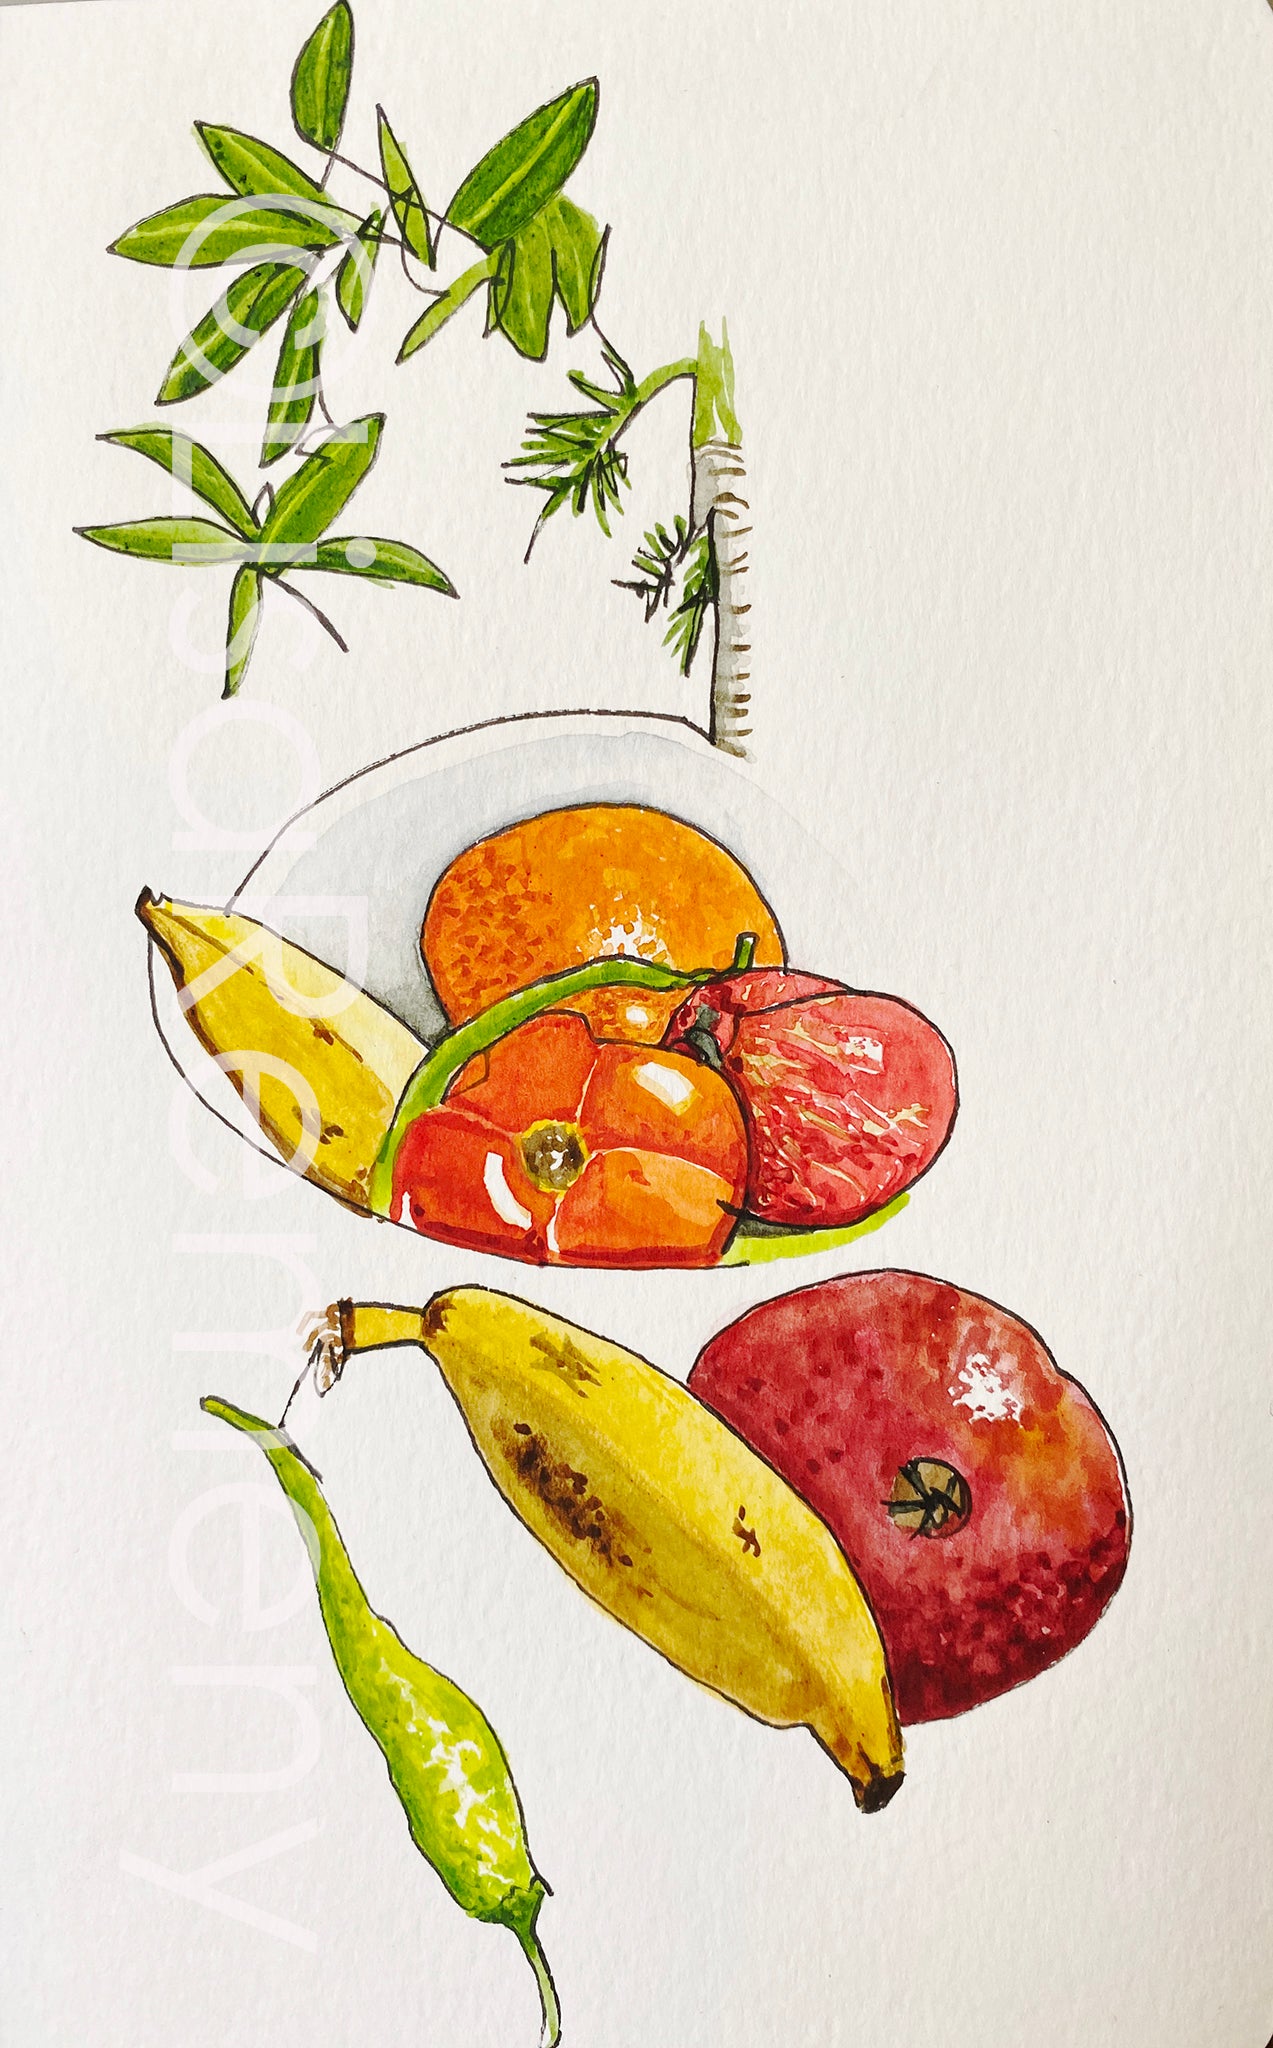 Watercolor + Ink on Paper - Still Life in India